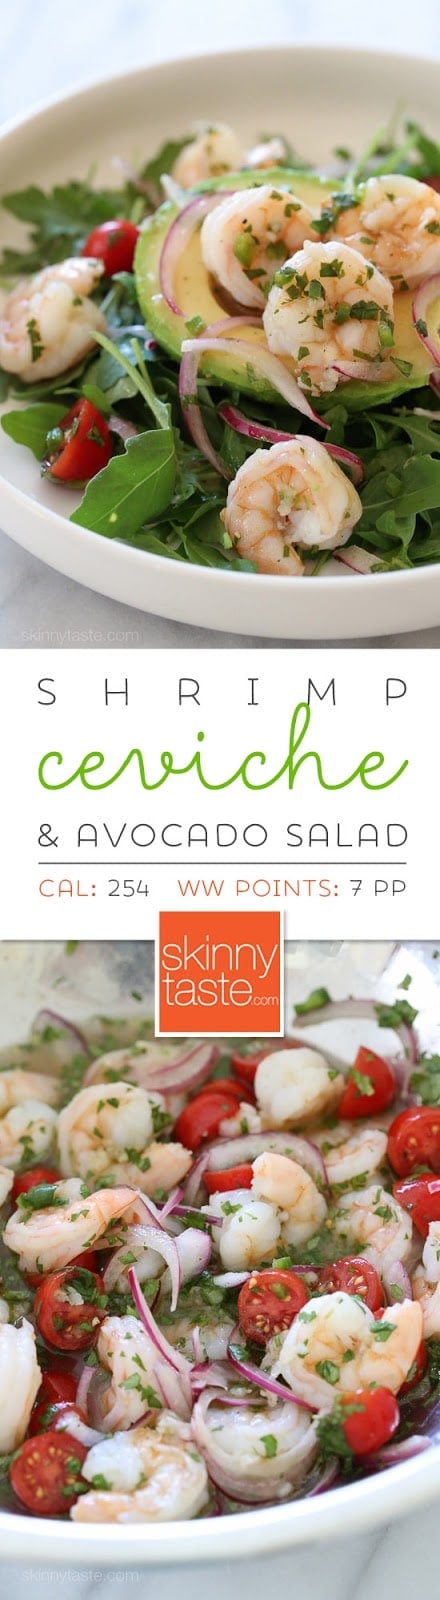 Shrimp Ceviche and Avocado Salad – now THIS is MY kind of salad! Easy, light and delicious!